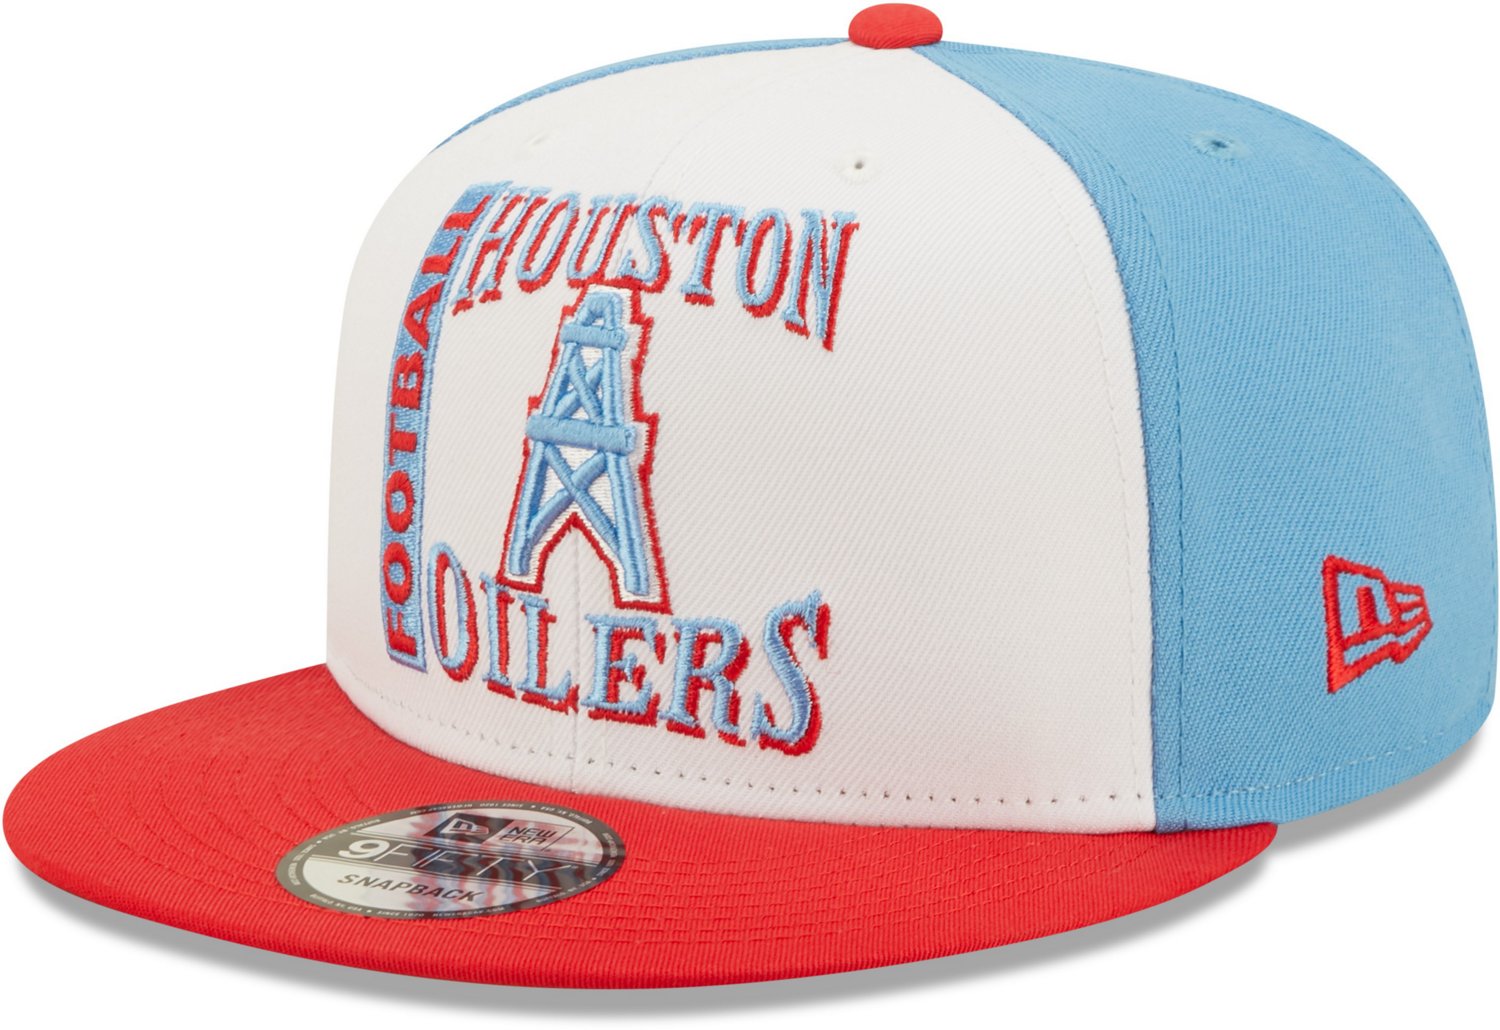 Houston Oilers Classic Images Gallery